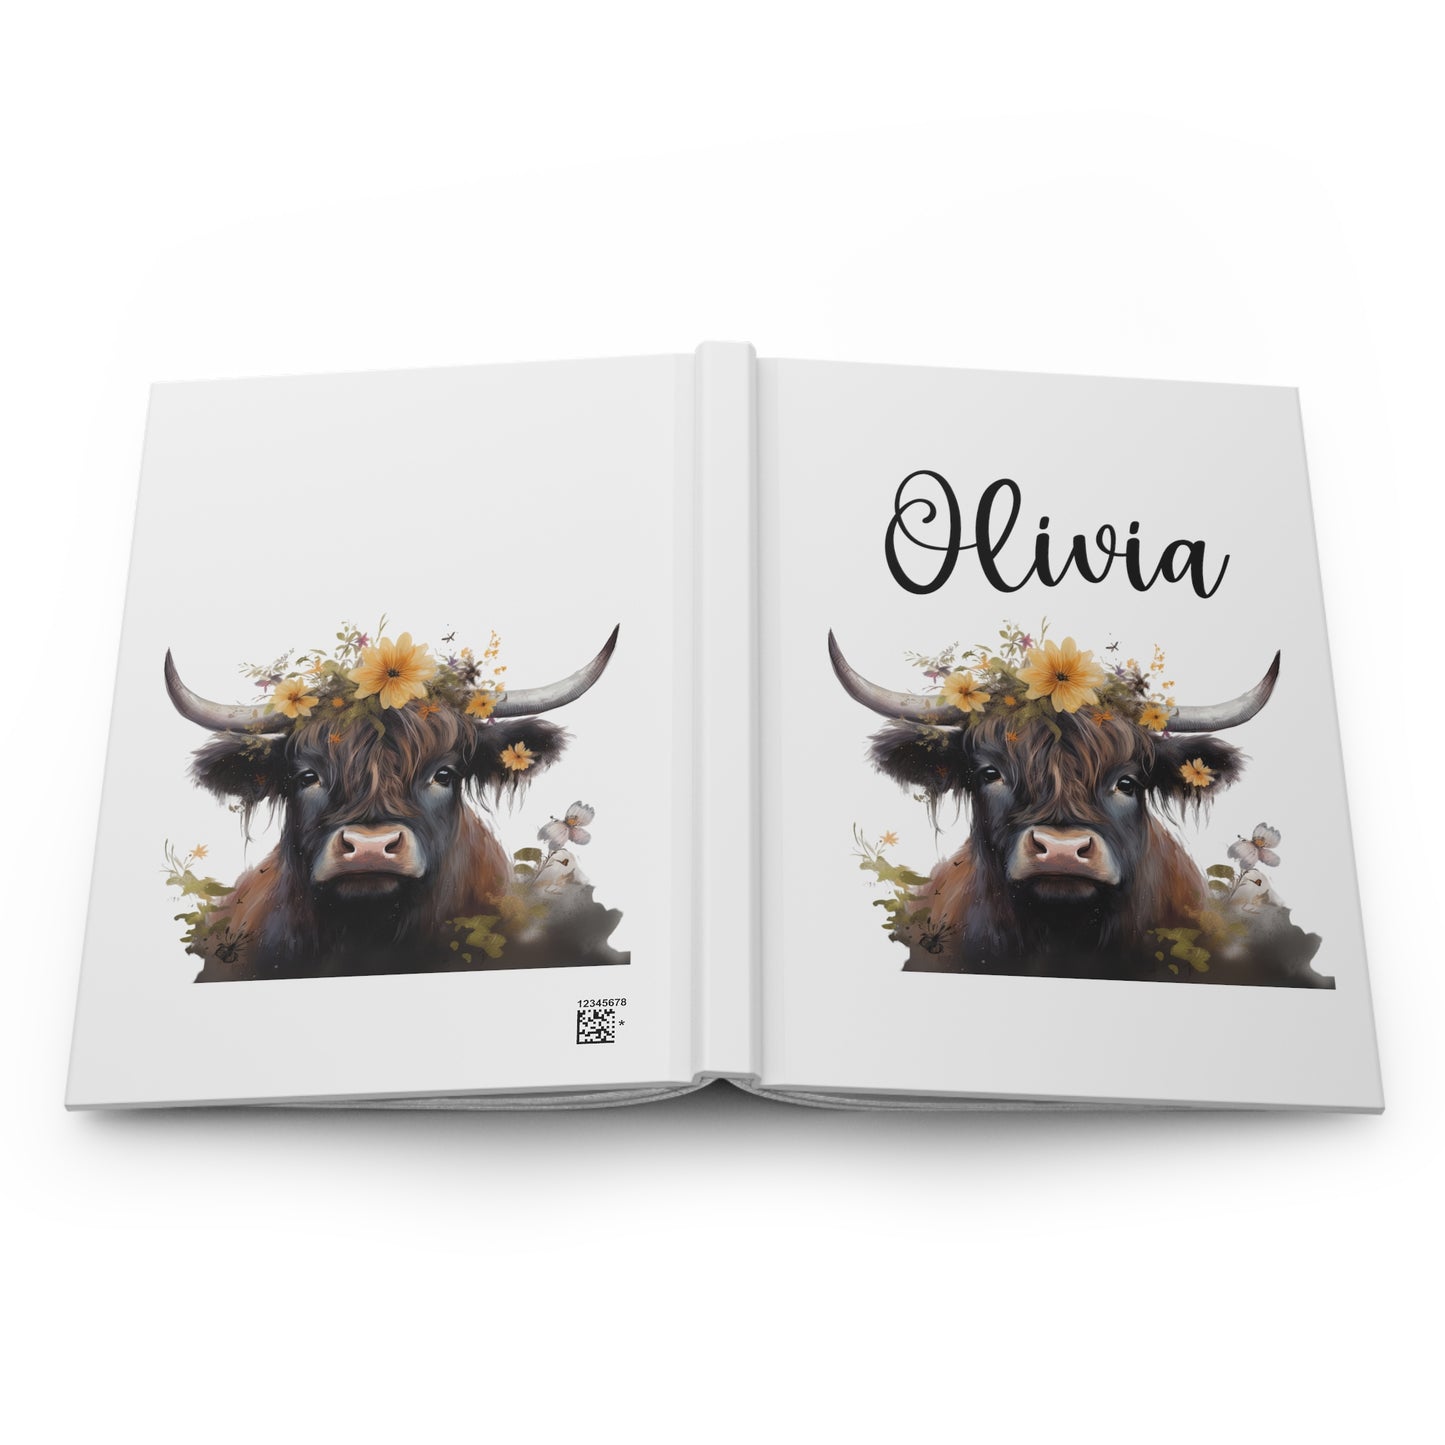 Highland Cow Journal / Personalized Journal